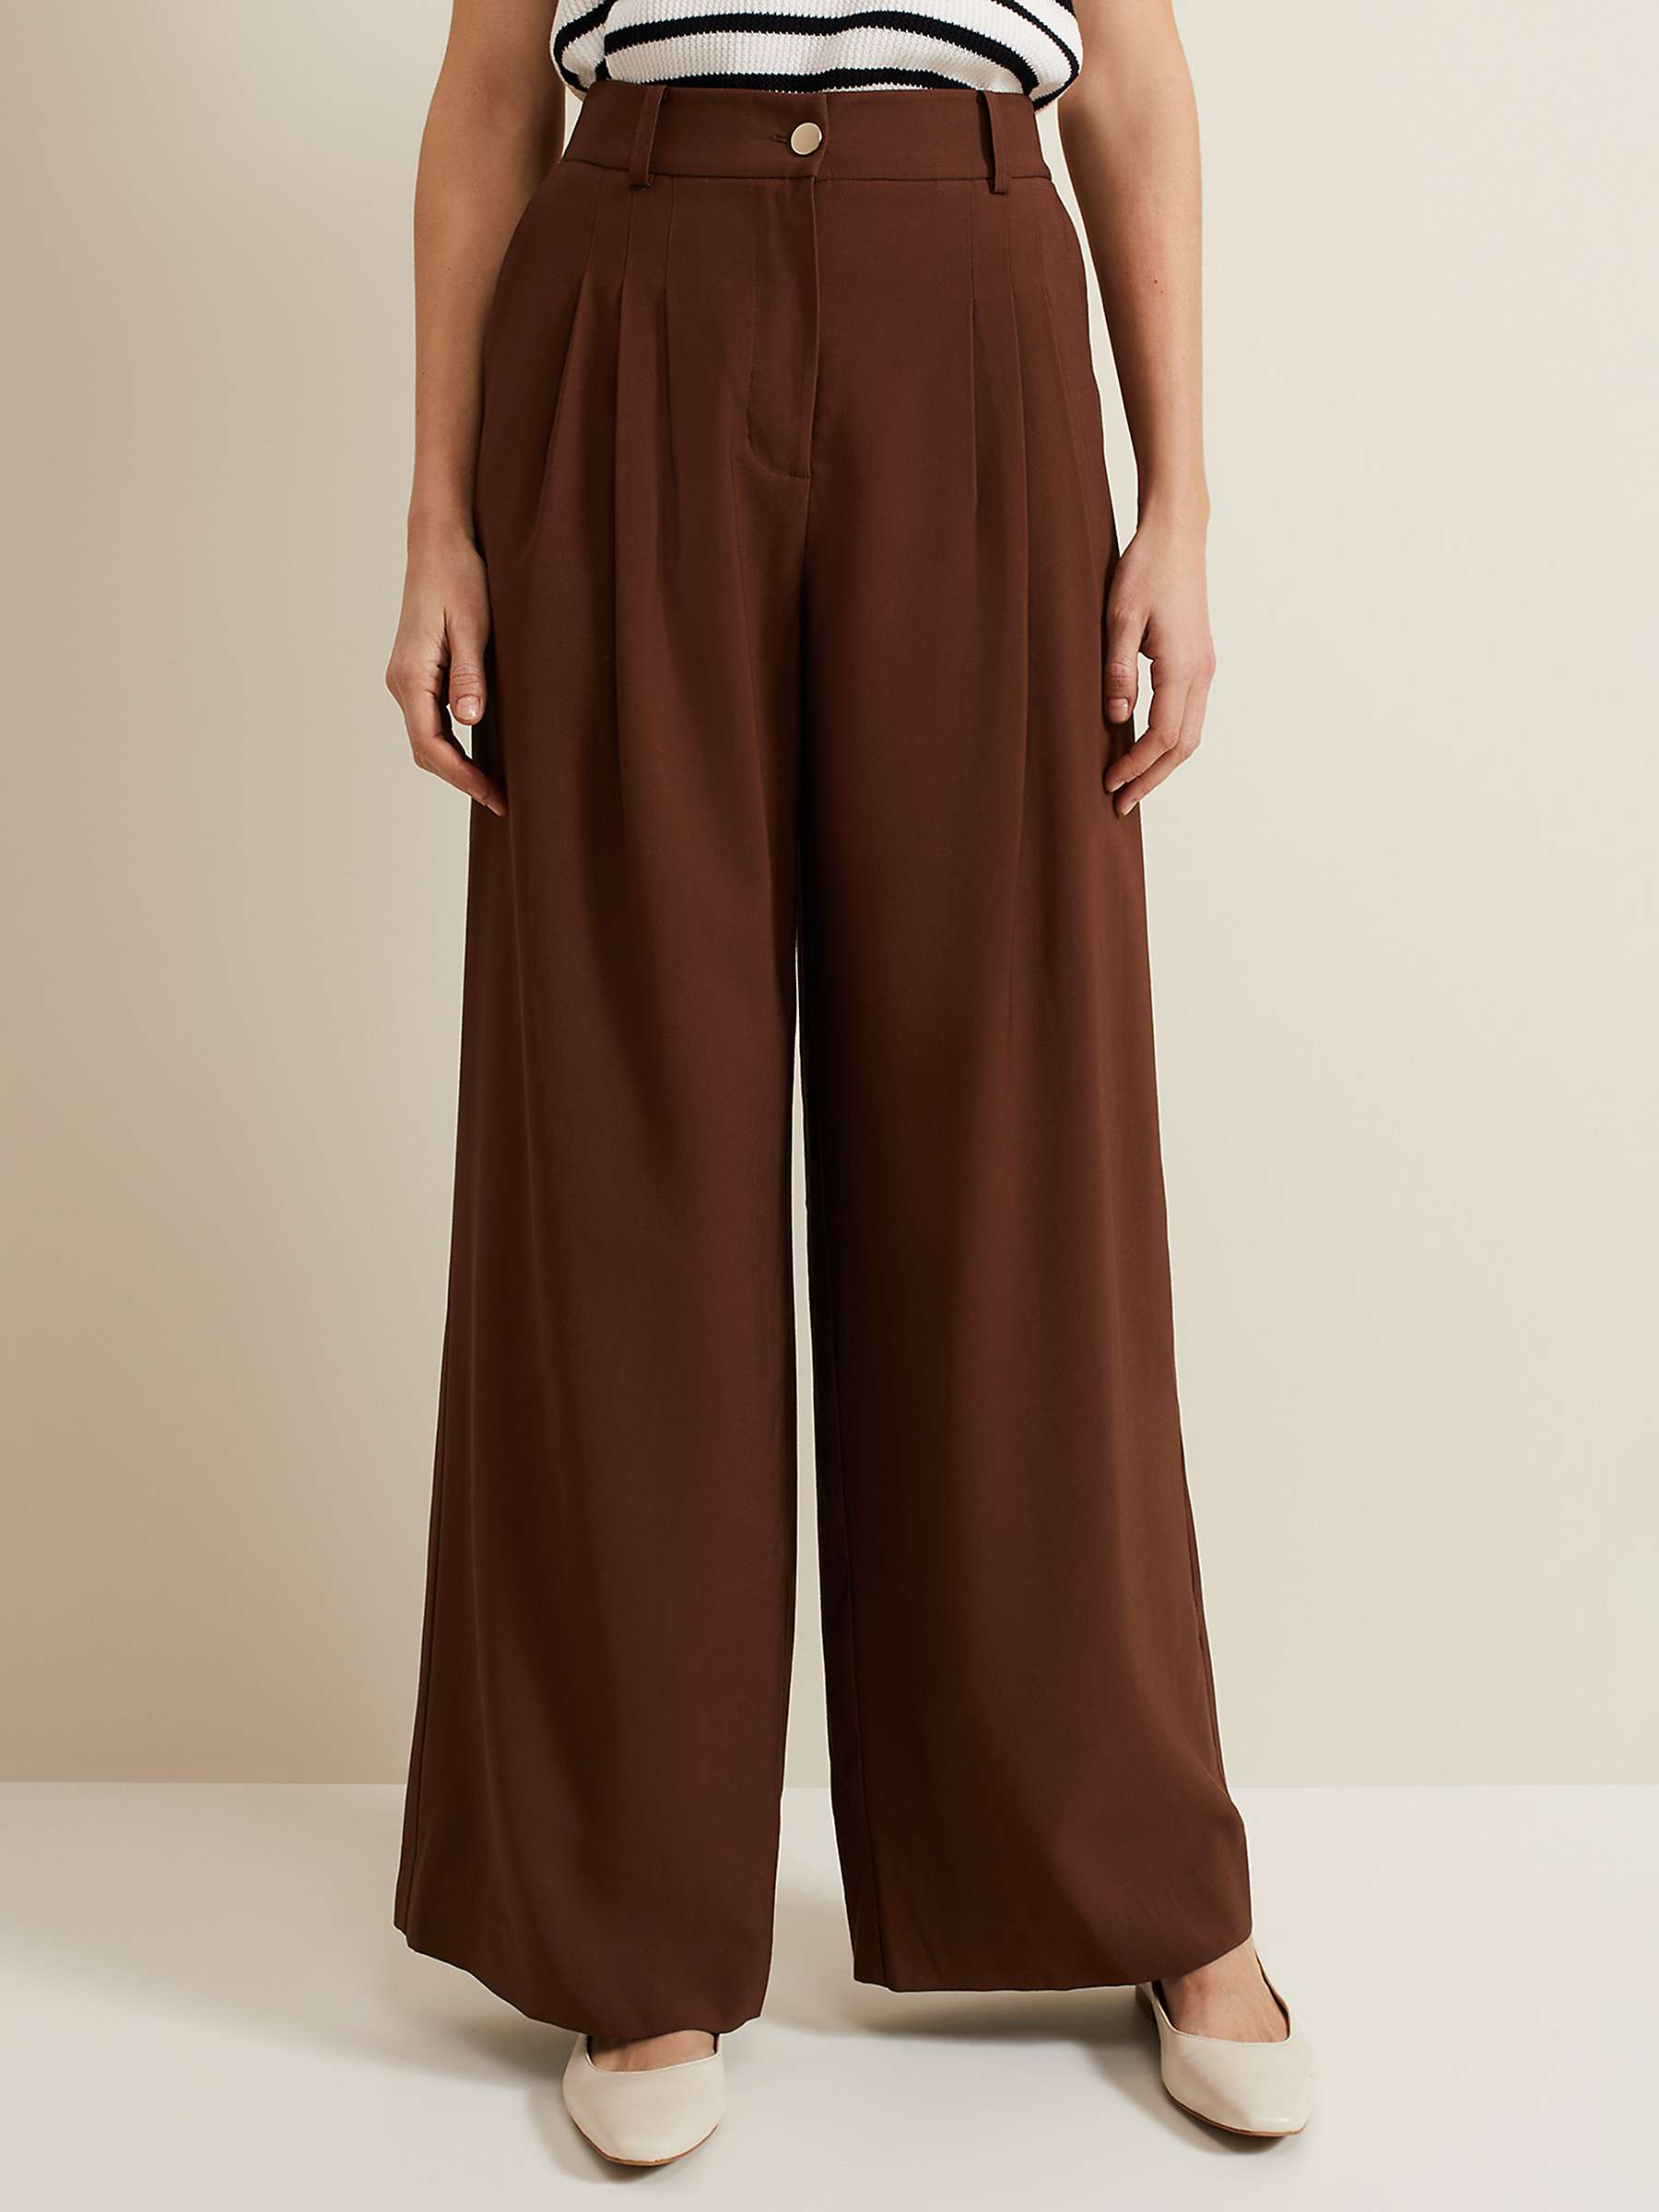 Buy Phase Eight Indiyah Wide Leg Trousers, Brown Online at johnlewis.com